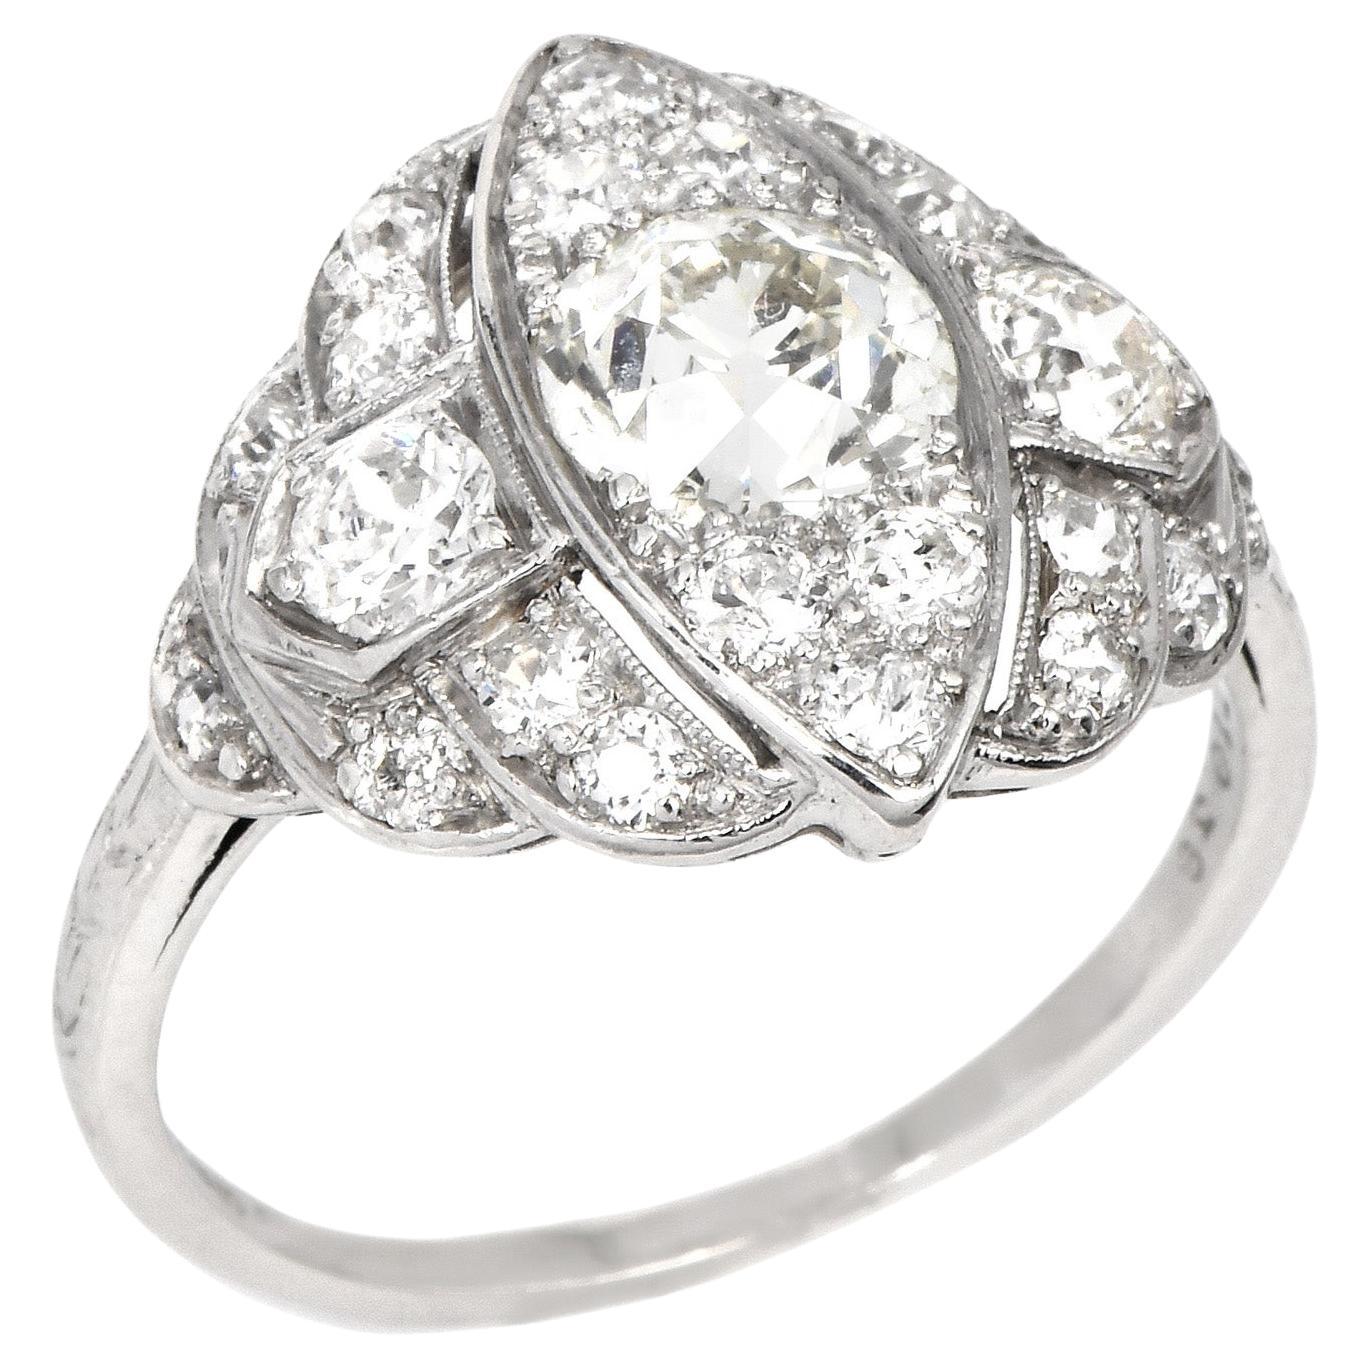 A dazzling dance of fire and shine, with the old European cut Diamonds in this piece.

This Antique diamond ring is Crafted in Platinum, accented with a centered European cut diamond, Prong-set, 1.10 carats, H-I color & VS clarity.

Complimenting